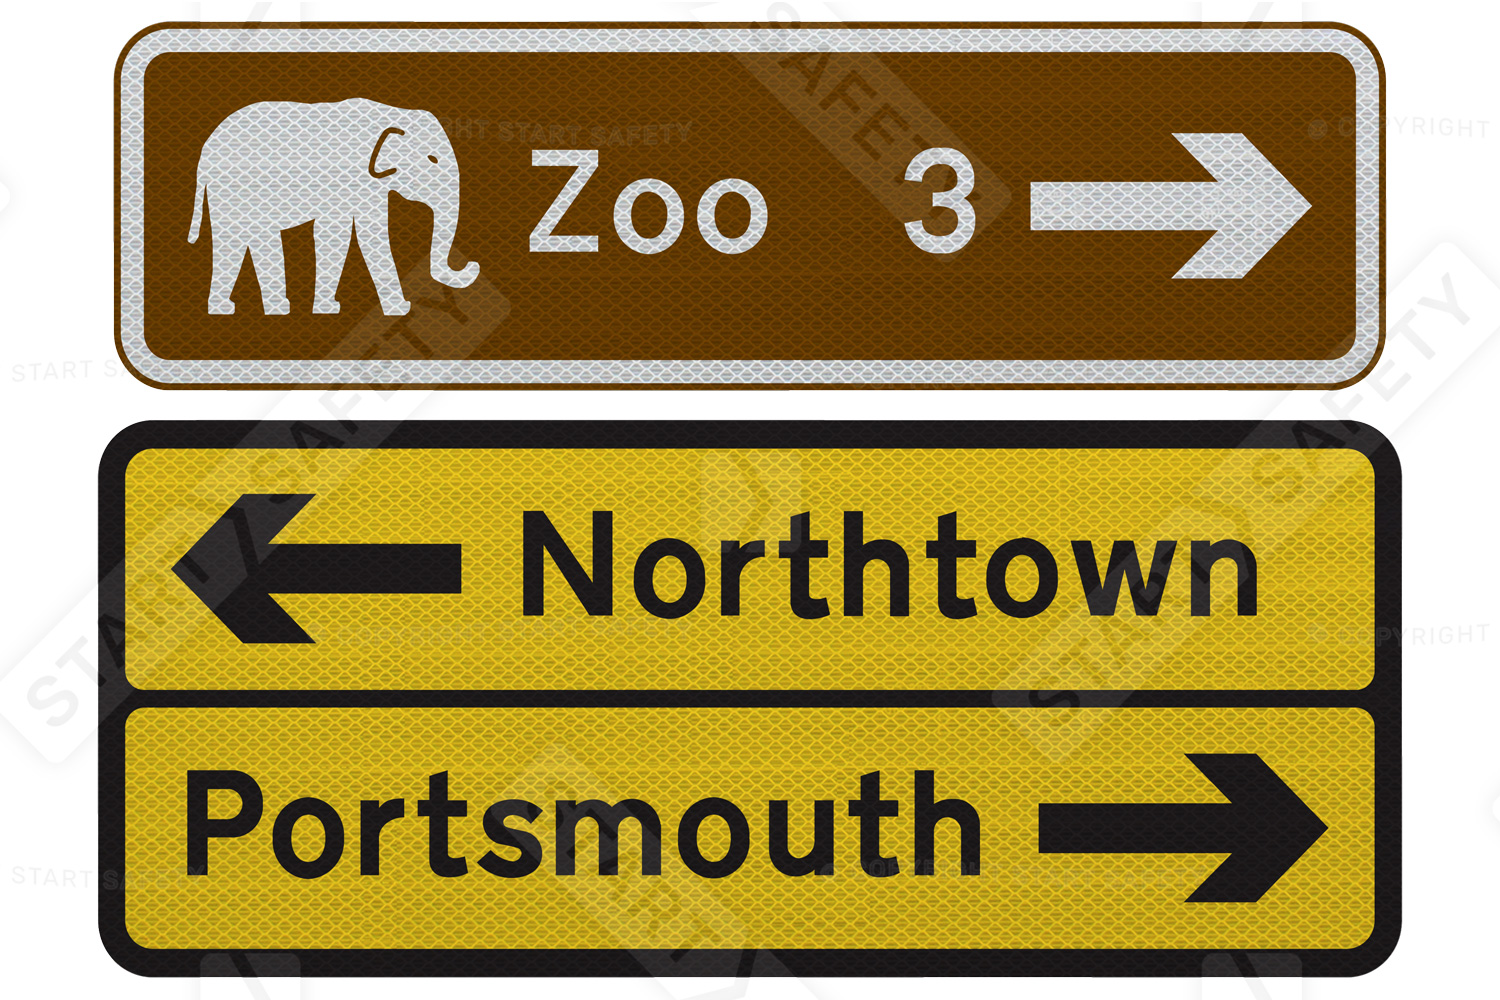 Example of directional tourist and diversion signs